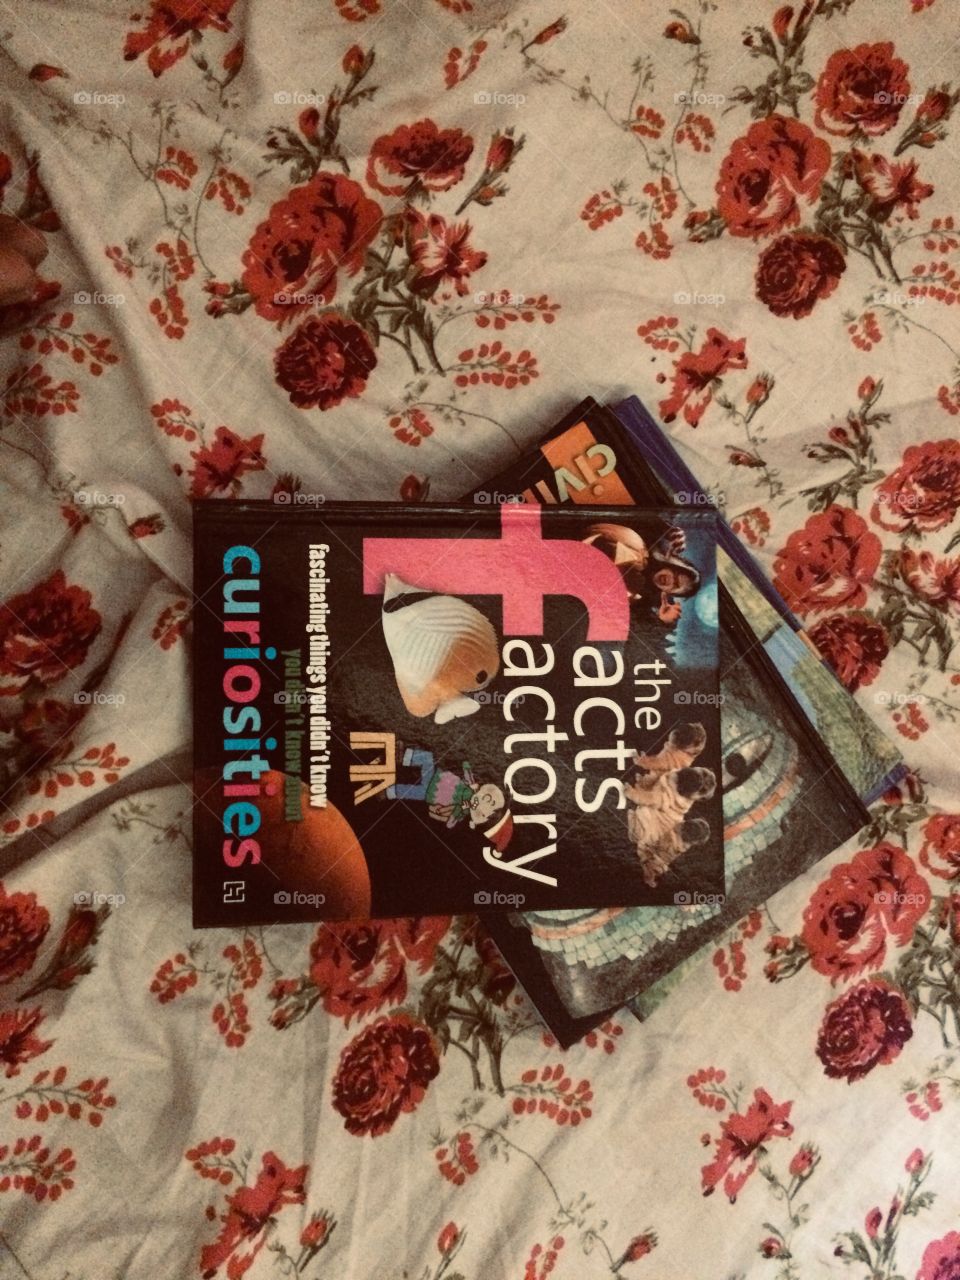 Facts book in bed